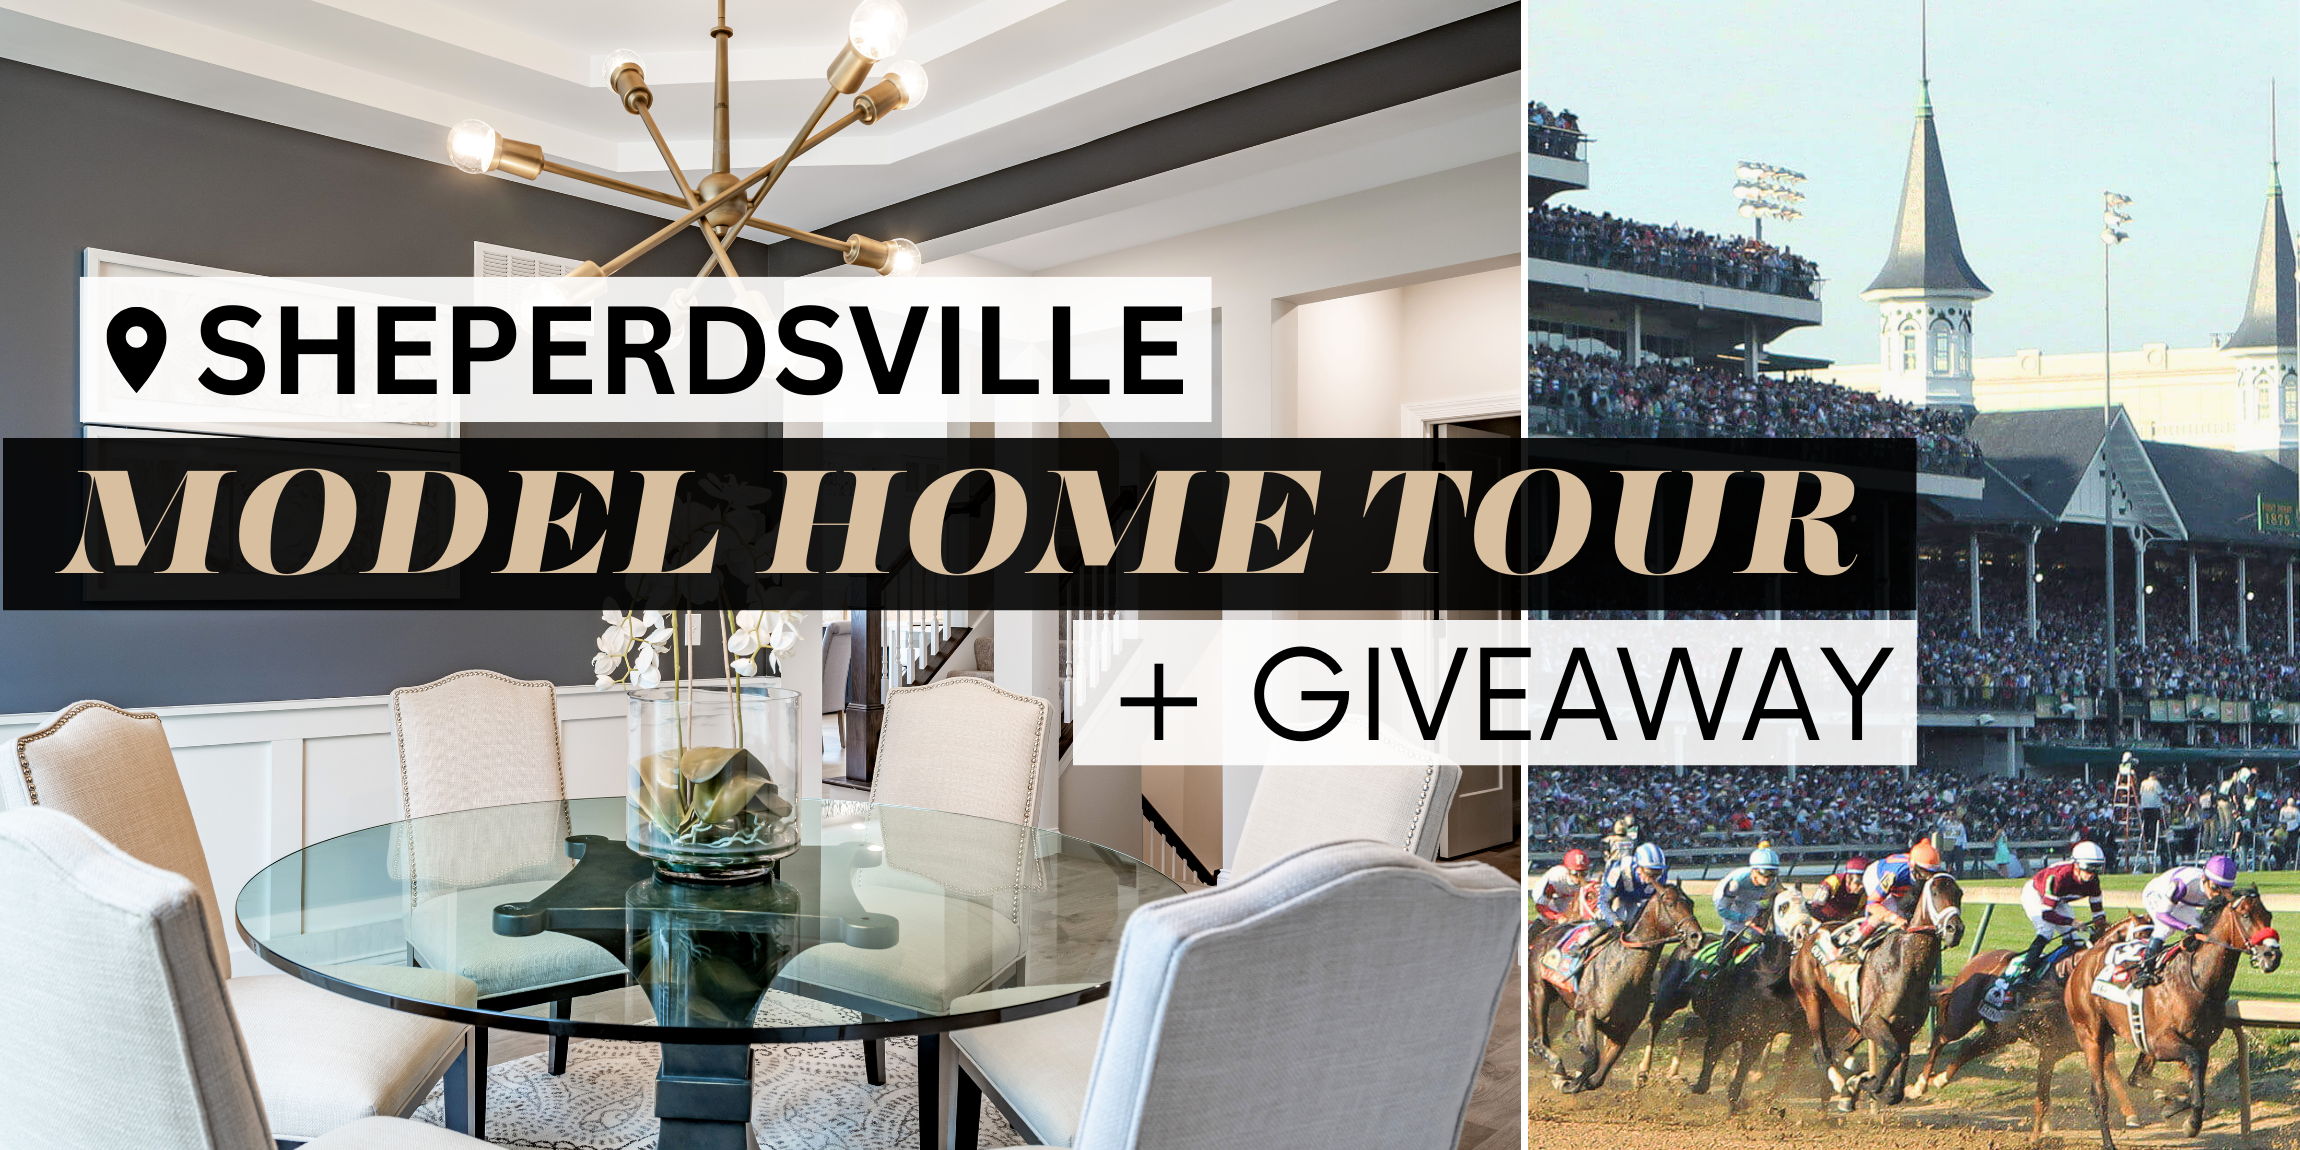 Model Home Tour & Giveaway in Shepherdsville, KY